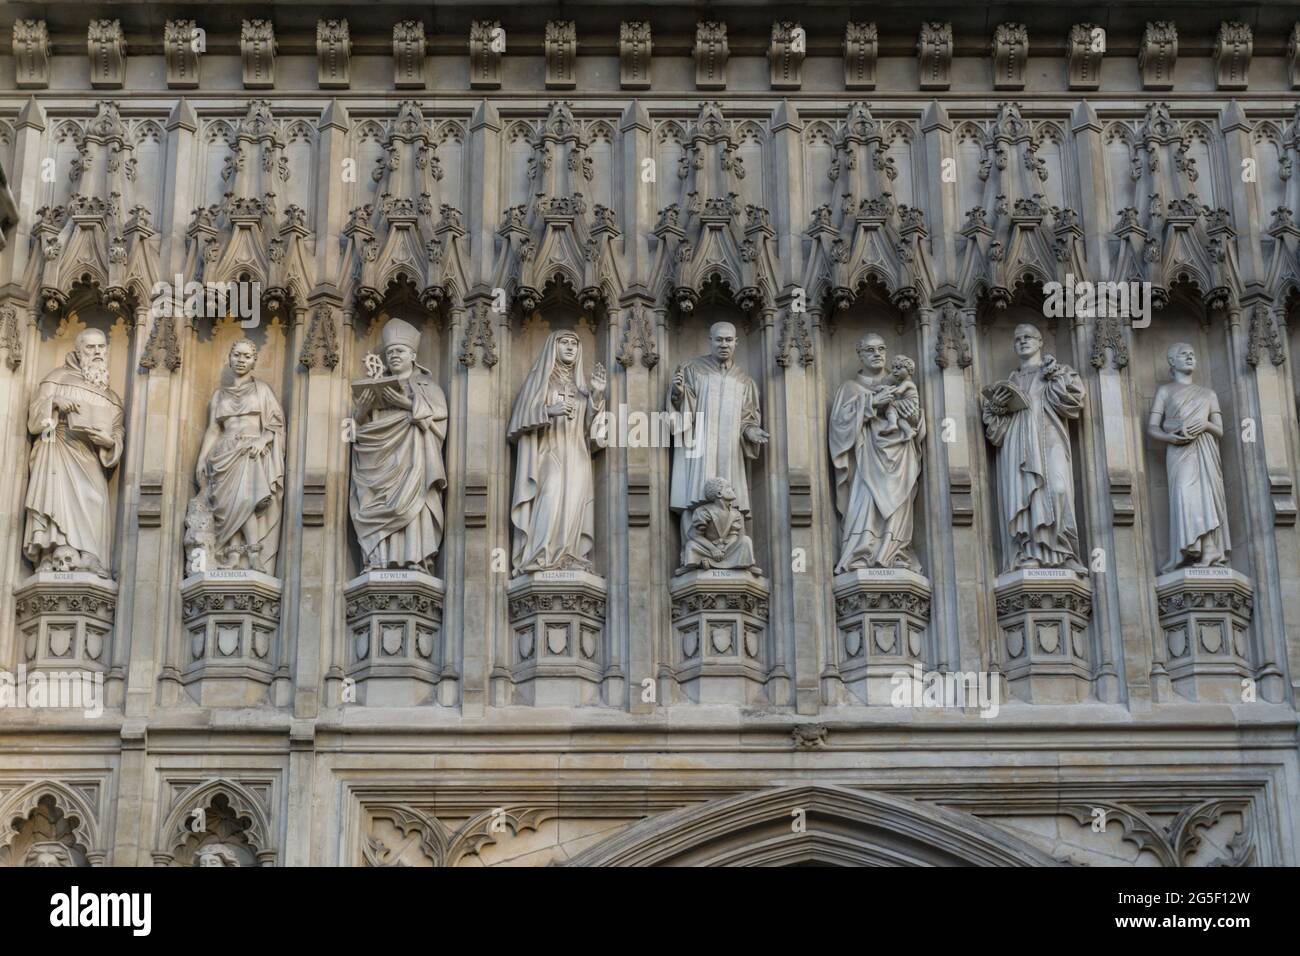 Close up detail of religious figures on the outside wall of Westminster Abbey, cathedral London, England Stock Photo